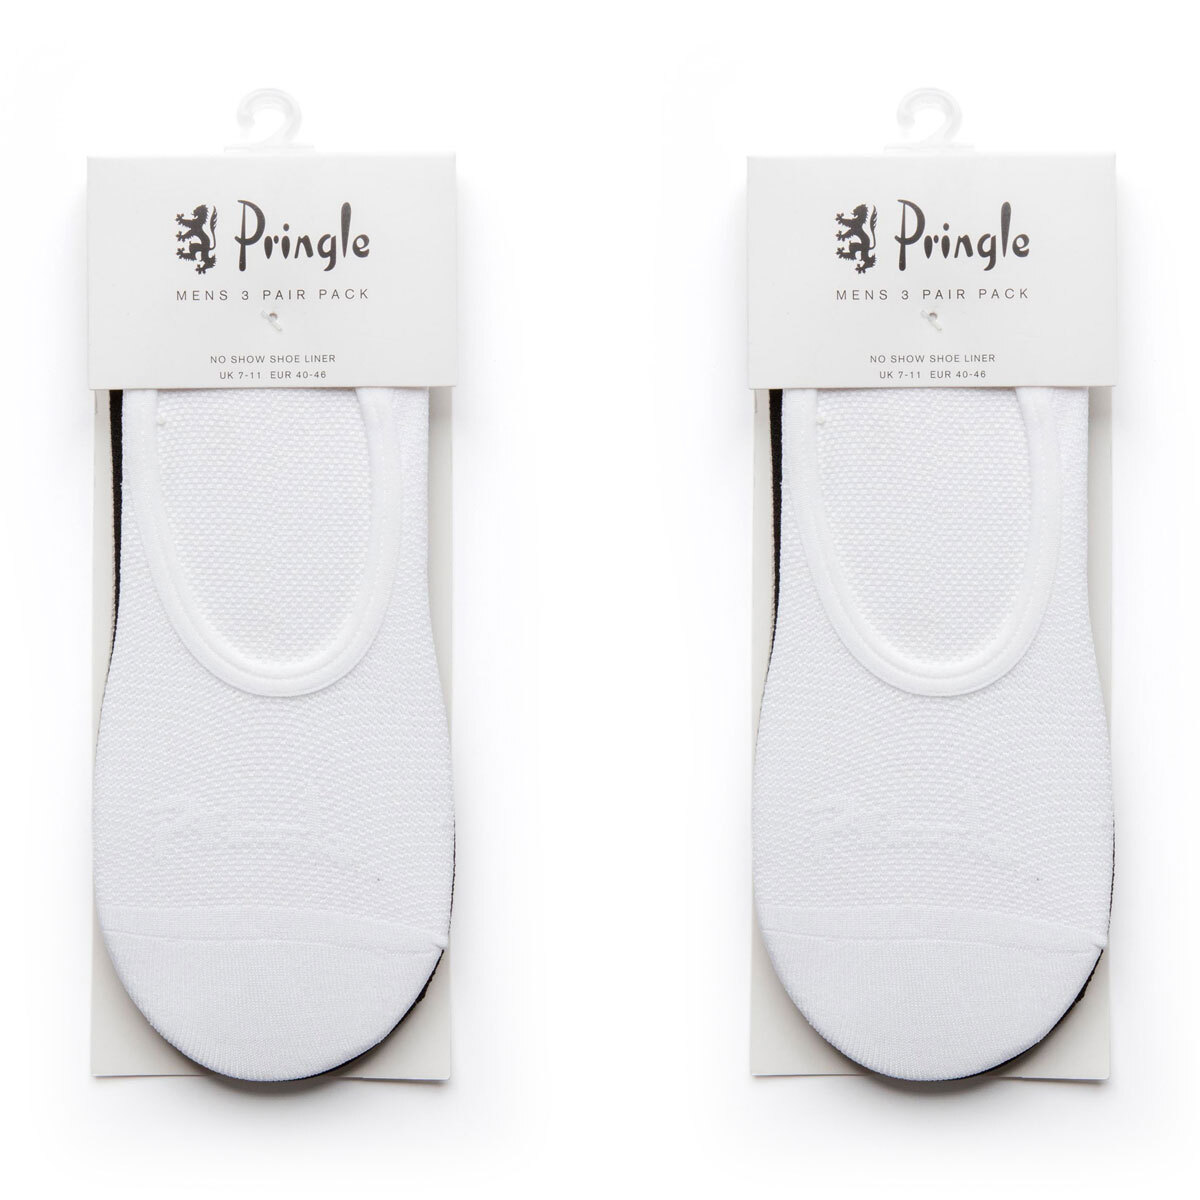 Pringle Men's 2 x 3 Pack Invisible Socks in Assorted Colours, Size 7-11